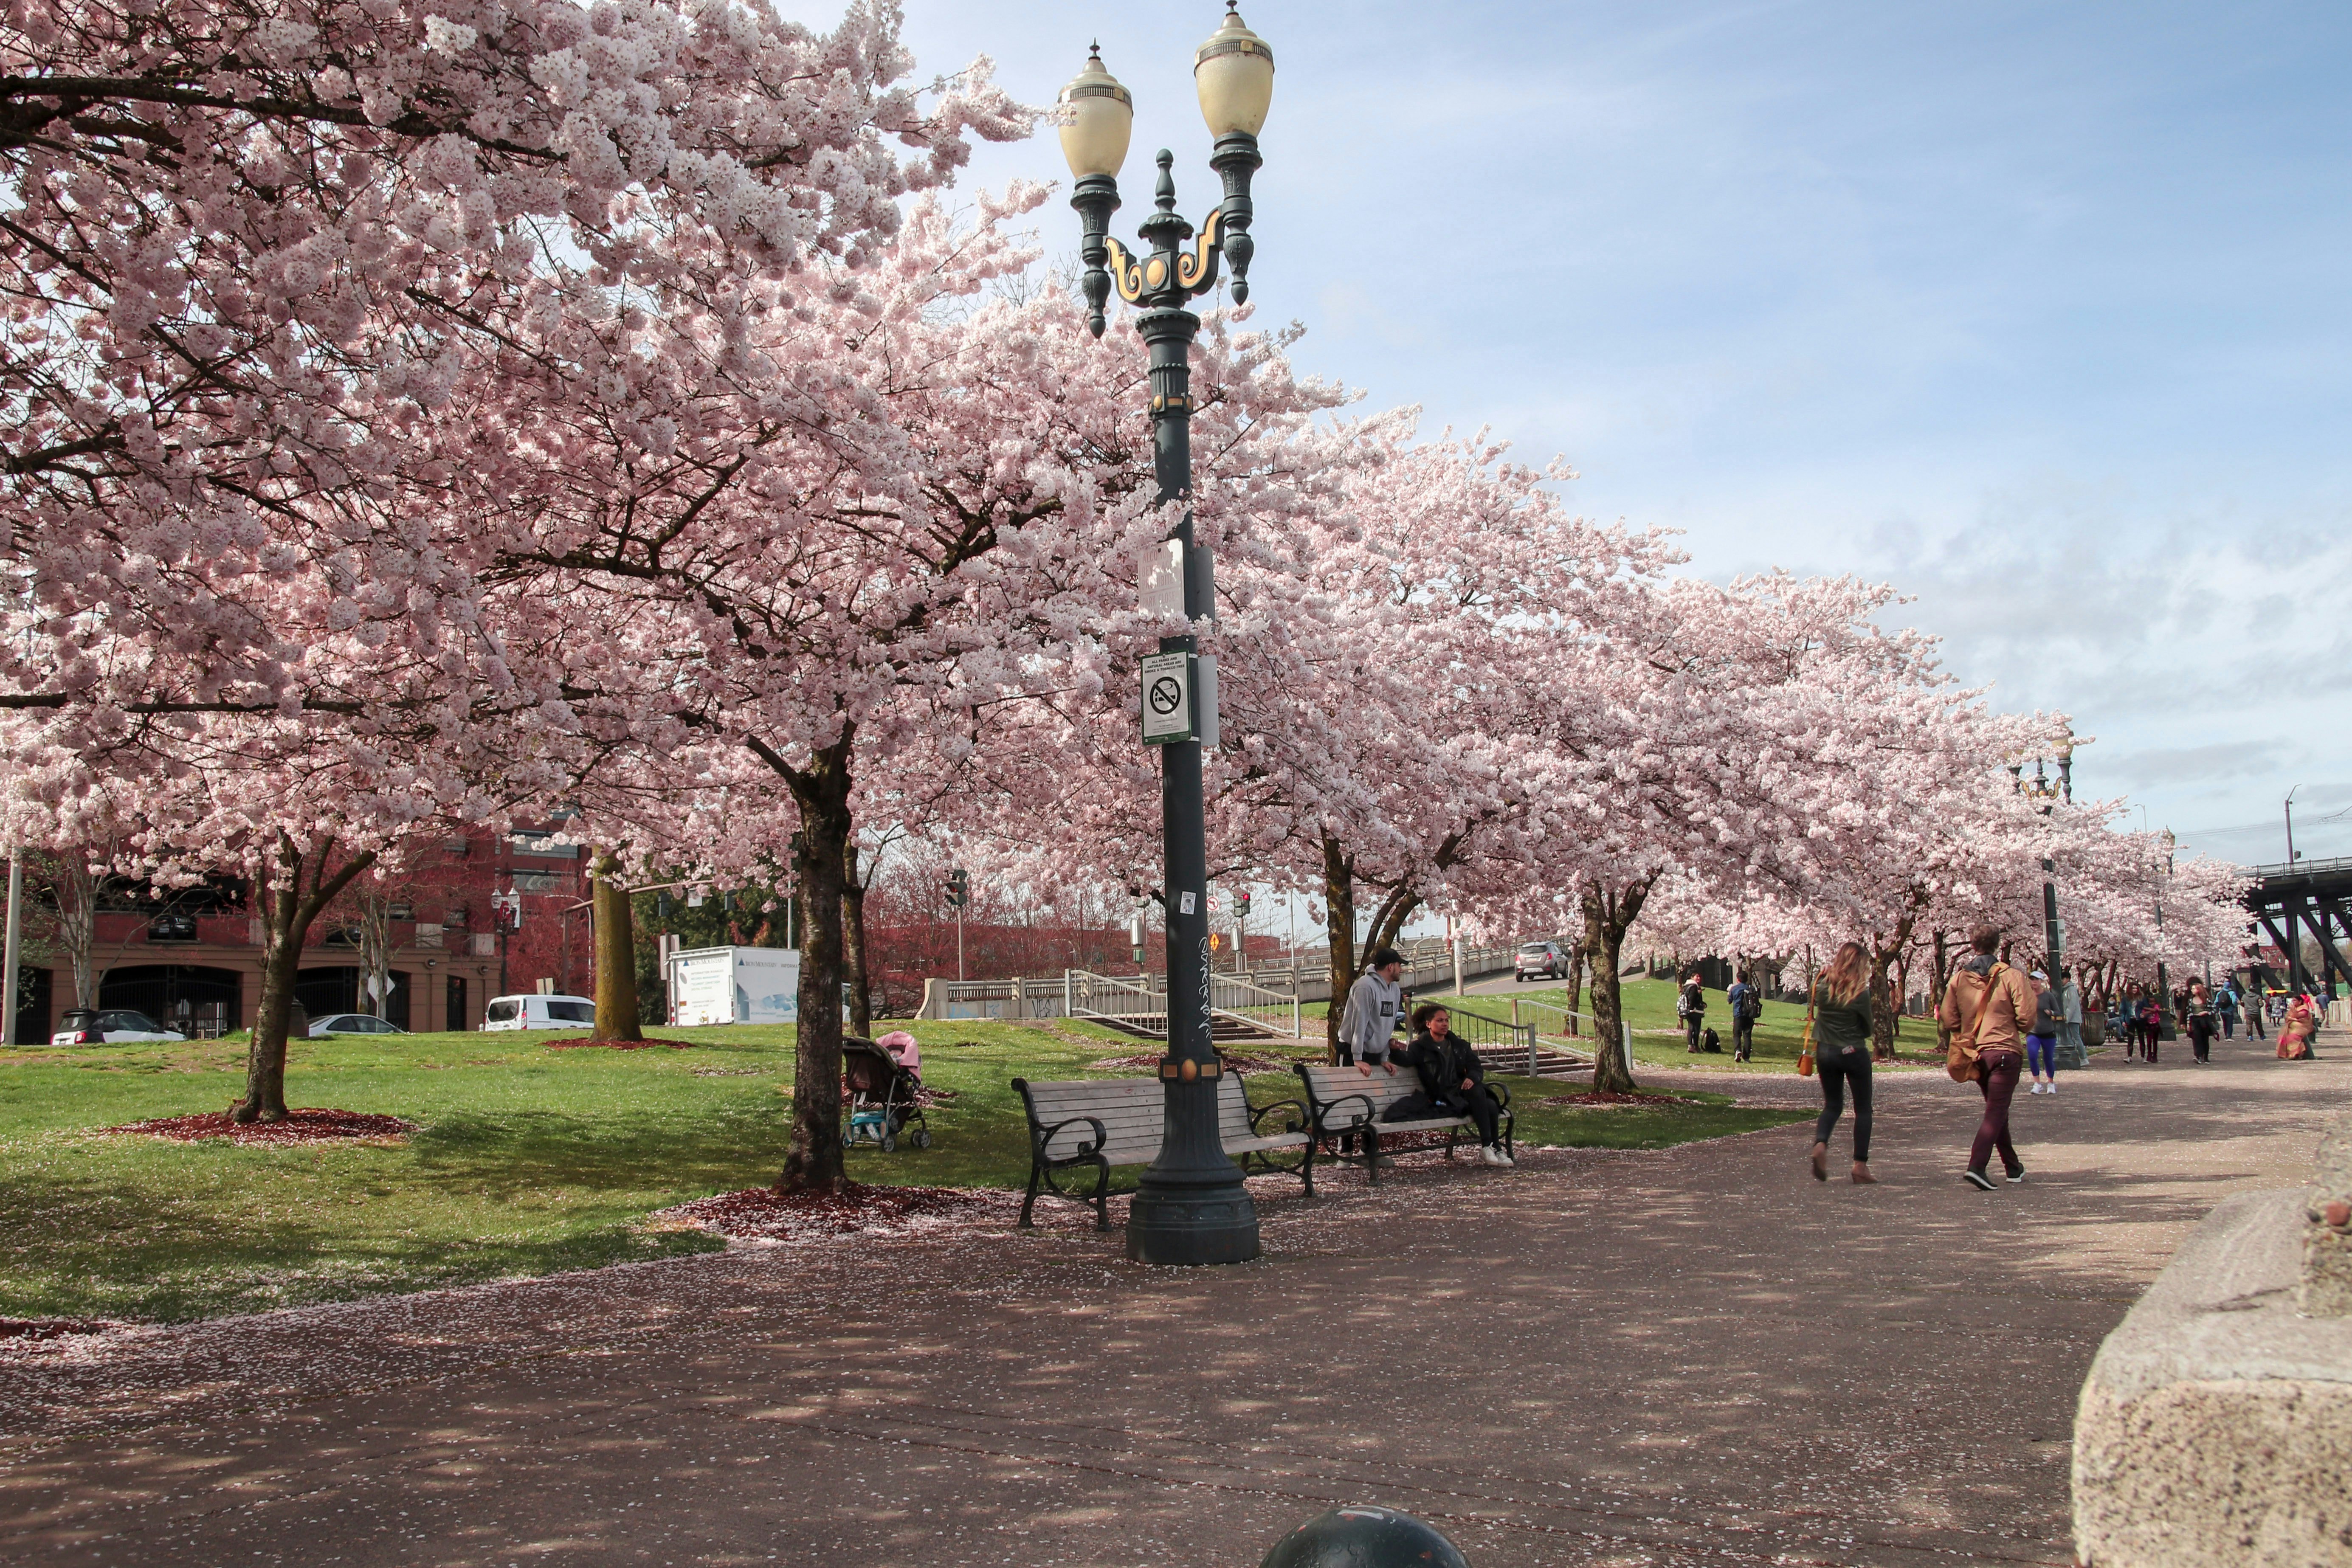 Visitors walking past cherry blossoms at Waterfront Park on a sunny spring day.